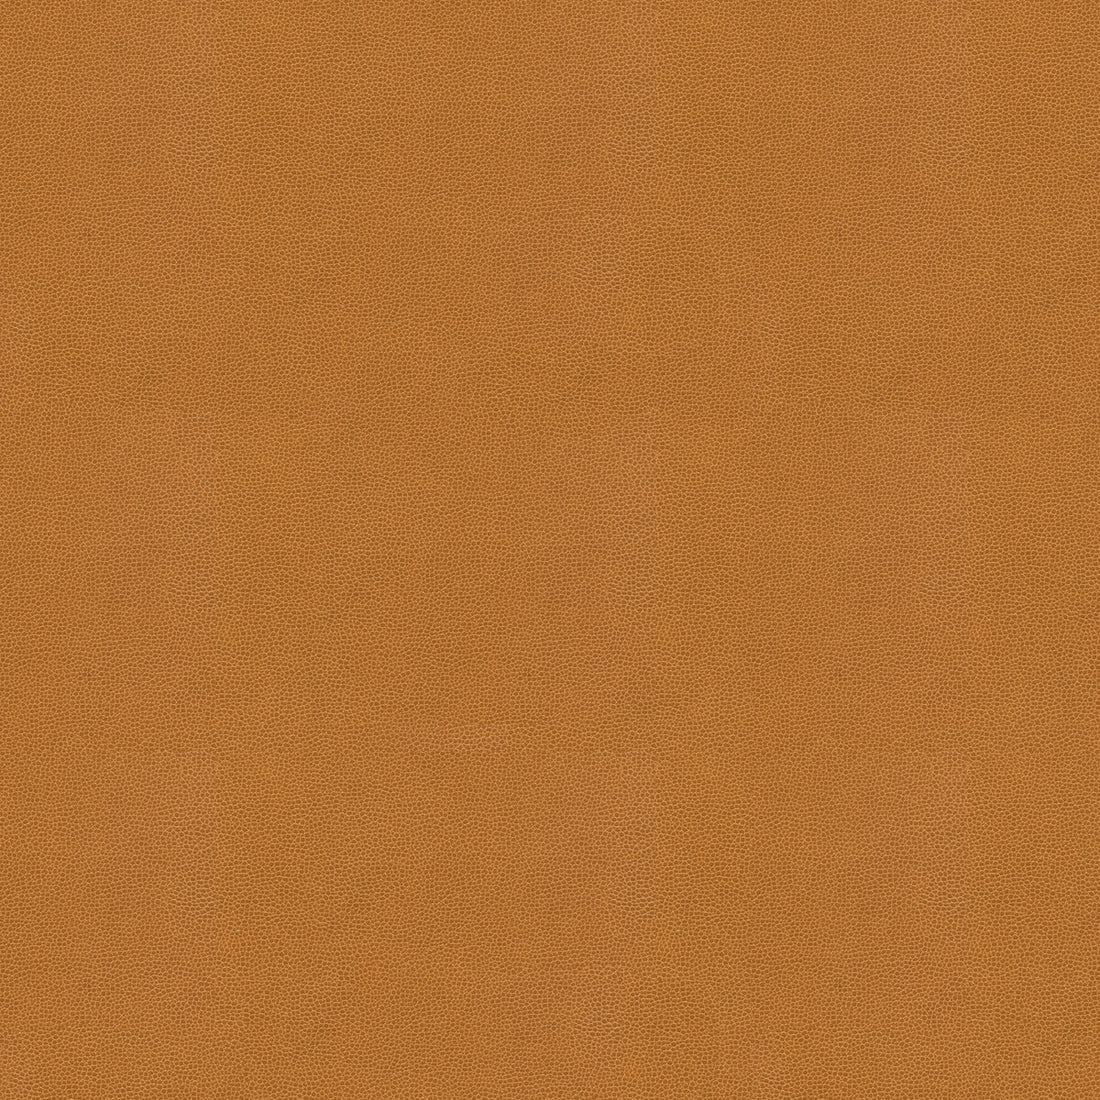 Impact fabric in caramel color - pattern IMPACT.16.0 - by Kravet Couture